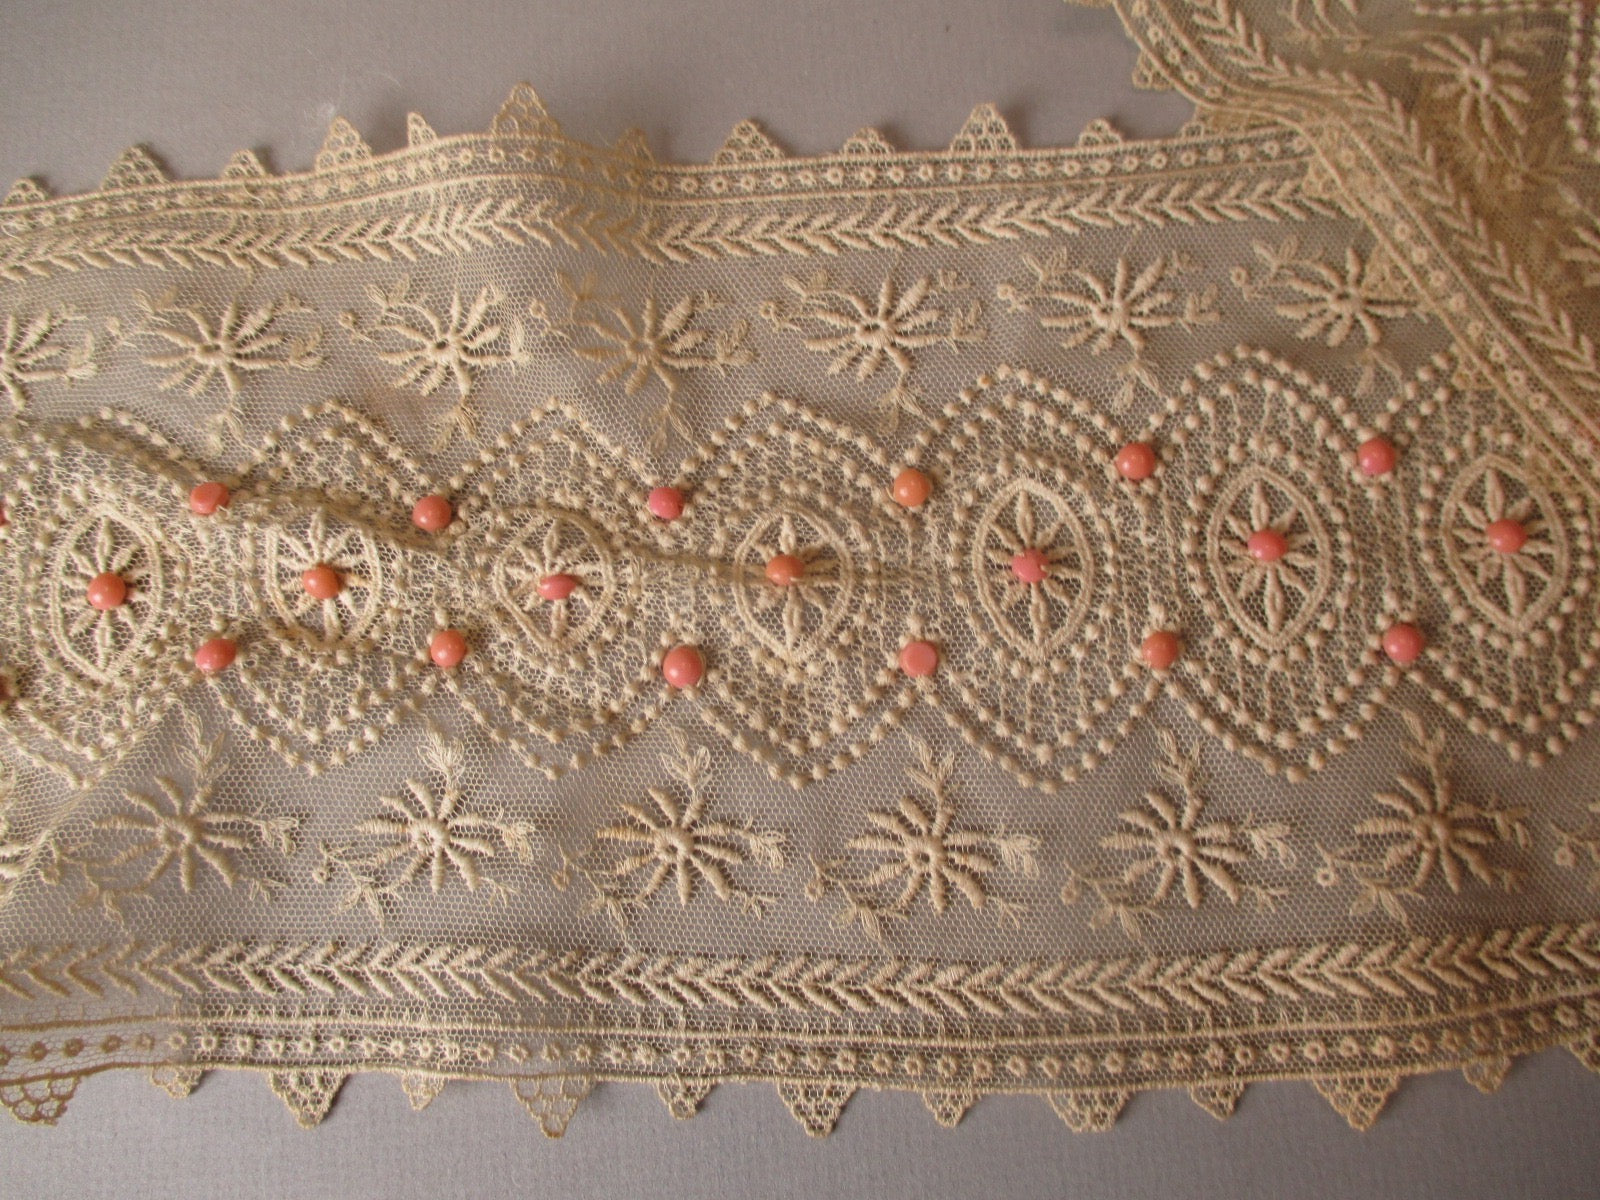 Antique Victorian lace flounce with beads